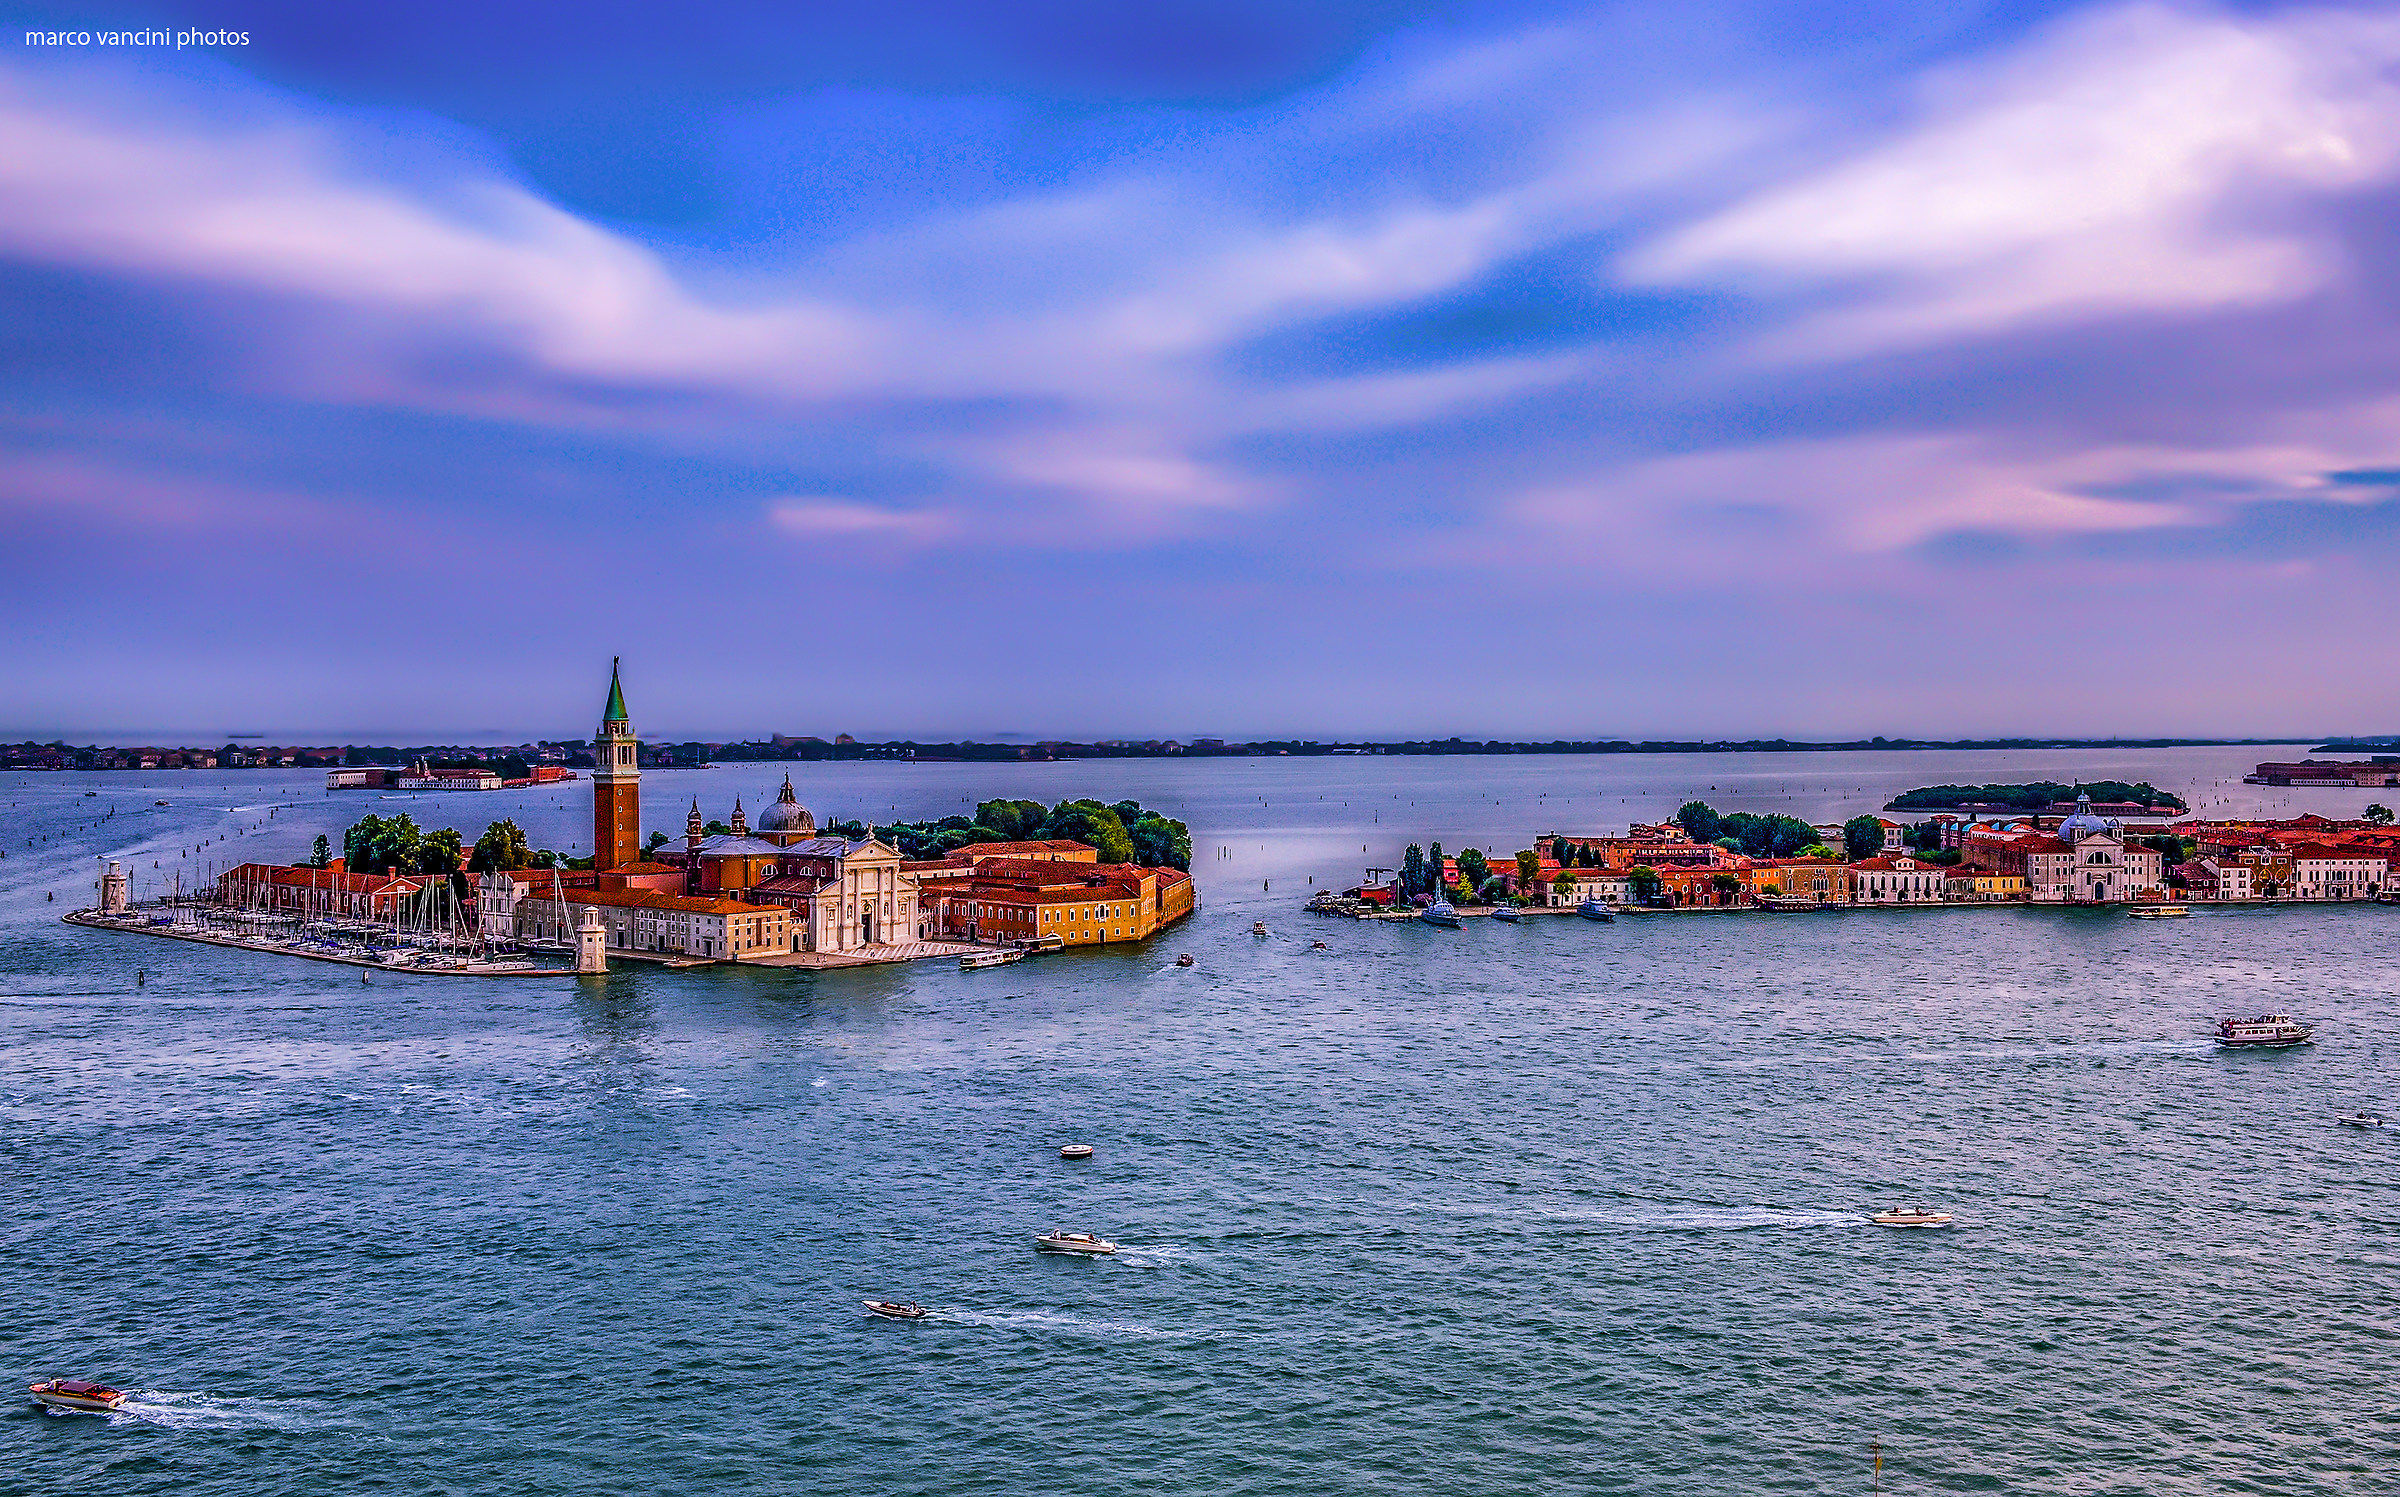 Postcards from Venice...